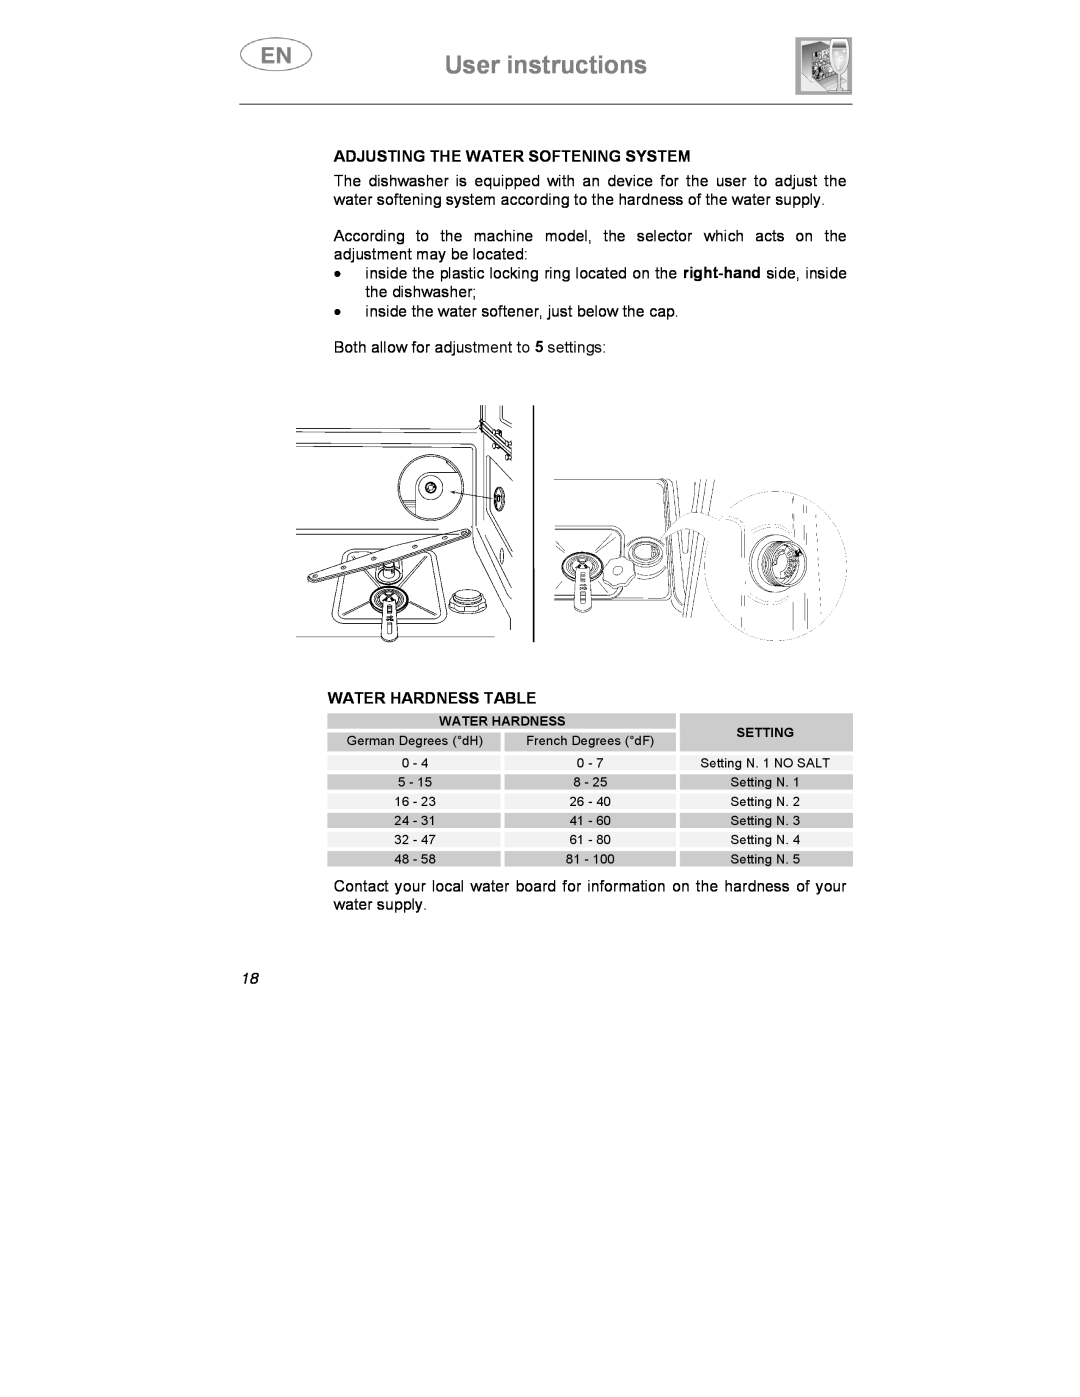 Smeg ST1105, ST1107S instruction manual User instructions, Adjusting The Water Softening System, Water Hardness Table 